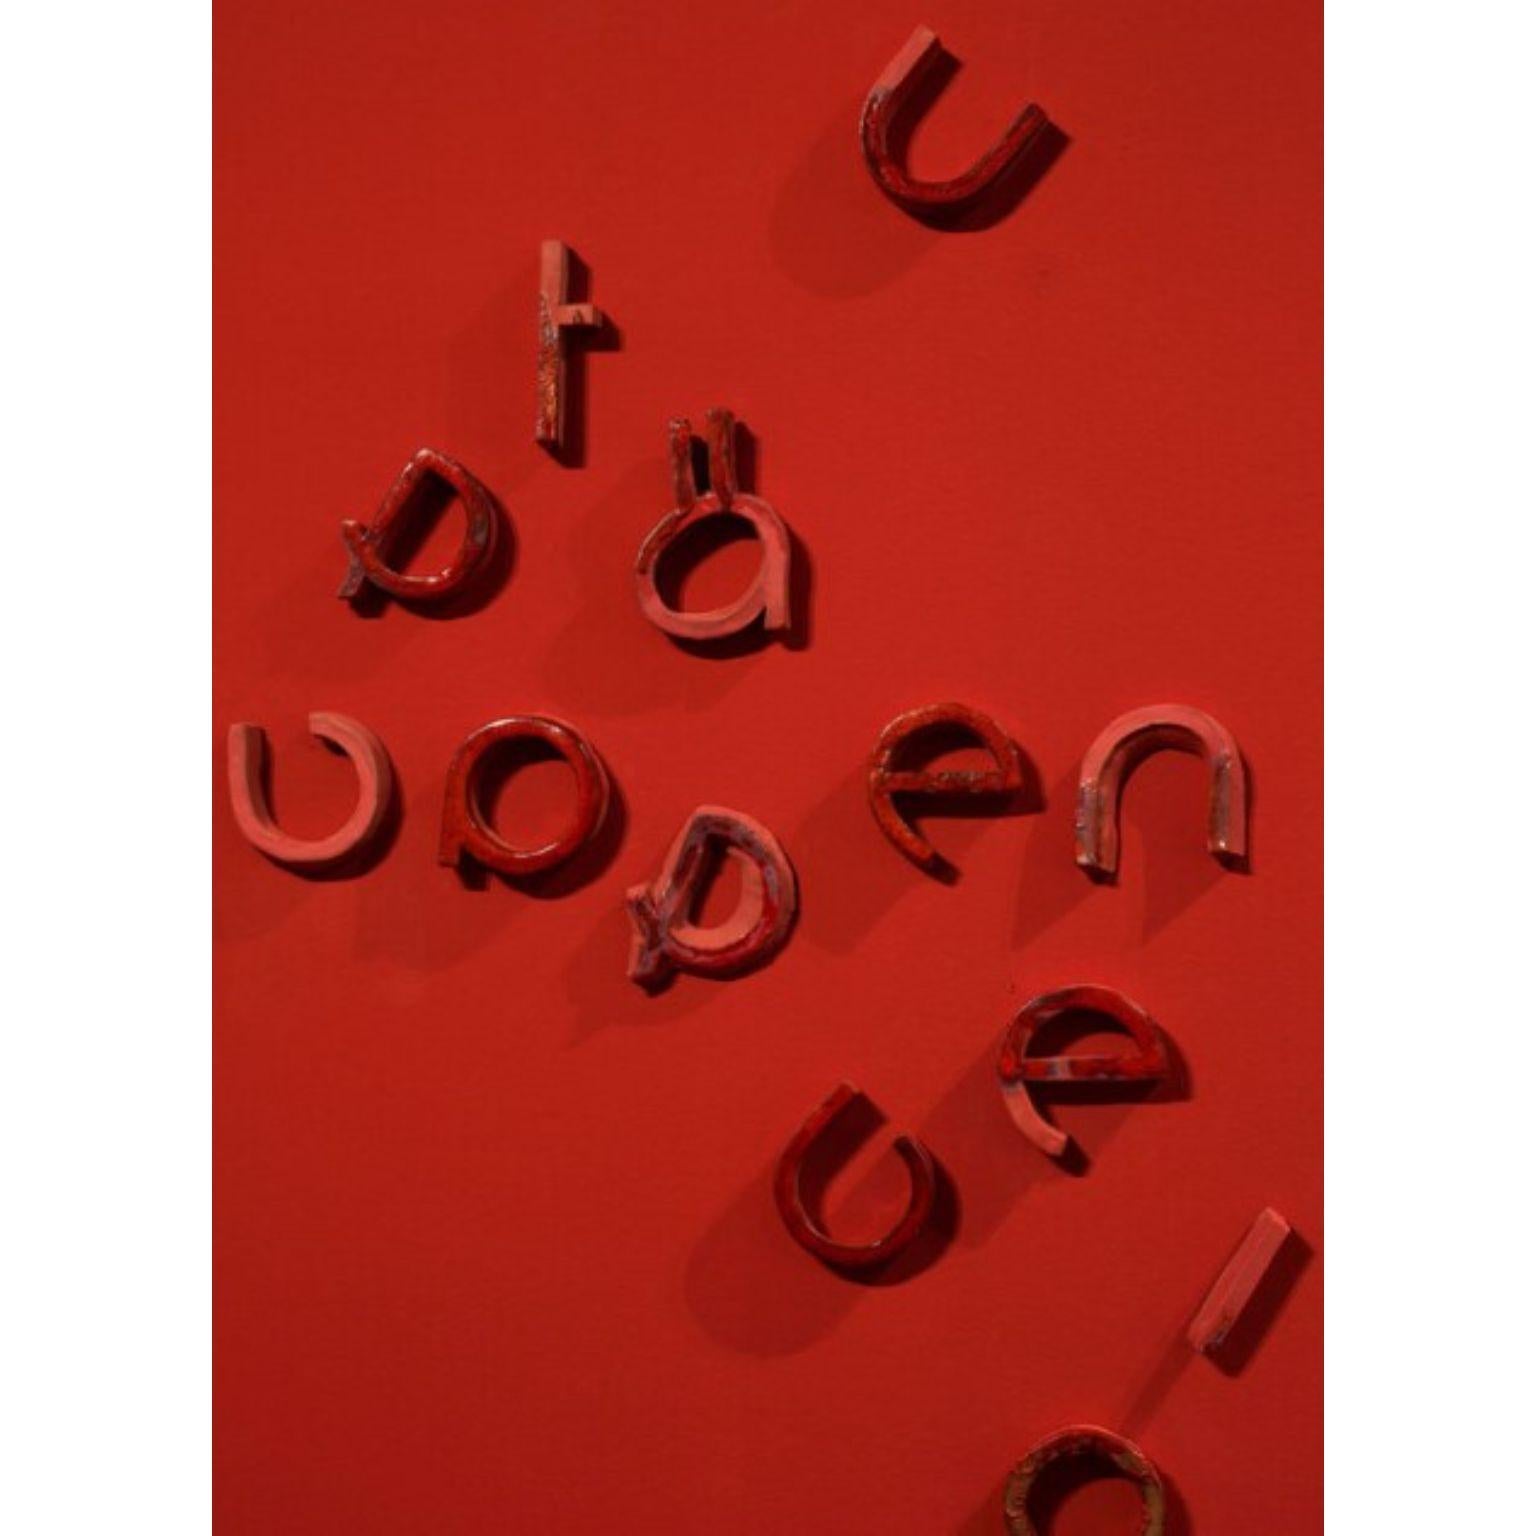 Finnish in Between Letters Large Installation by Tero Kuitunen For Sale